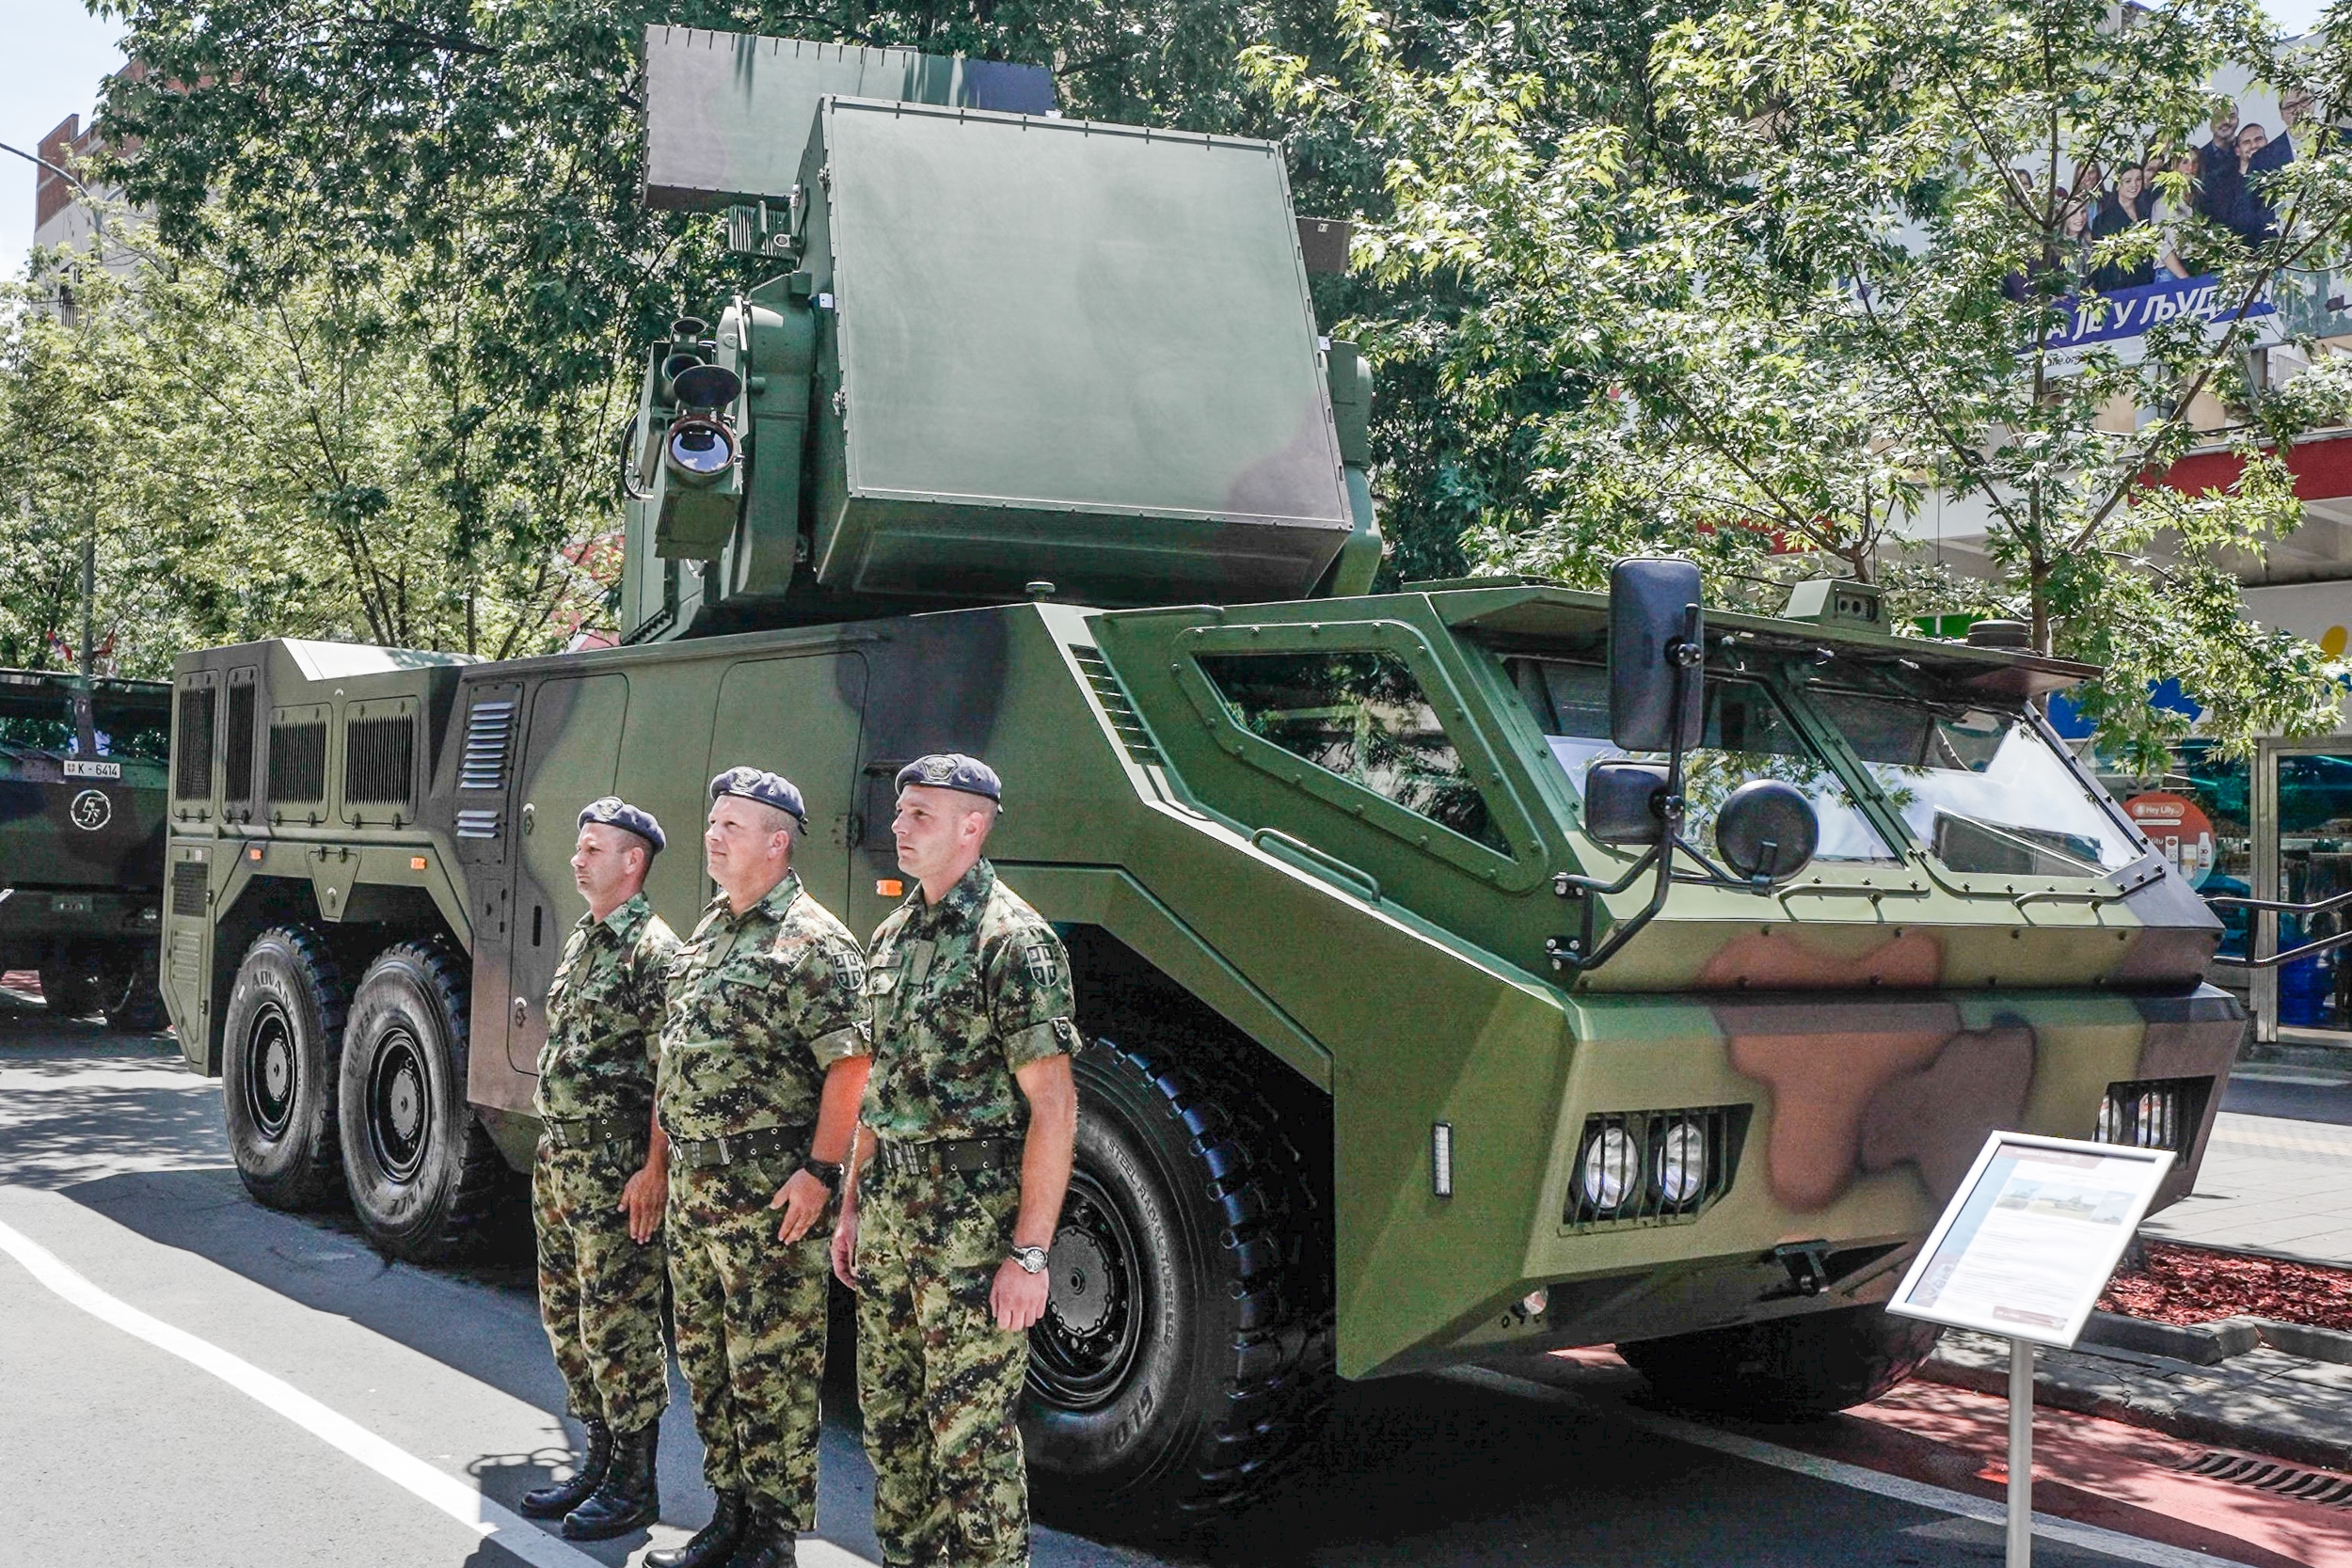 Serbia has received the Chinese HQ-17AE surface-to-air missile system, which is based on the Soviet Tor SAM system